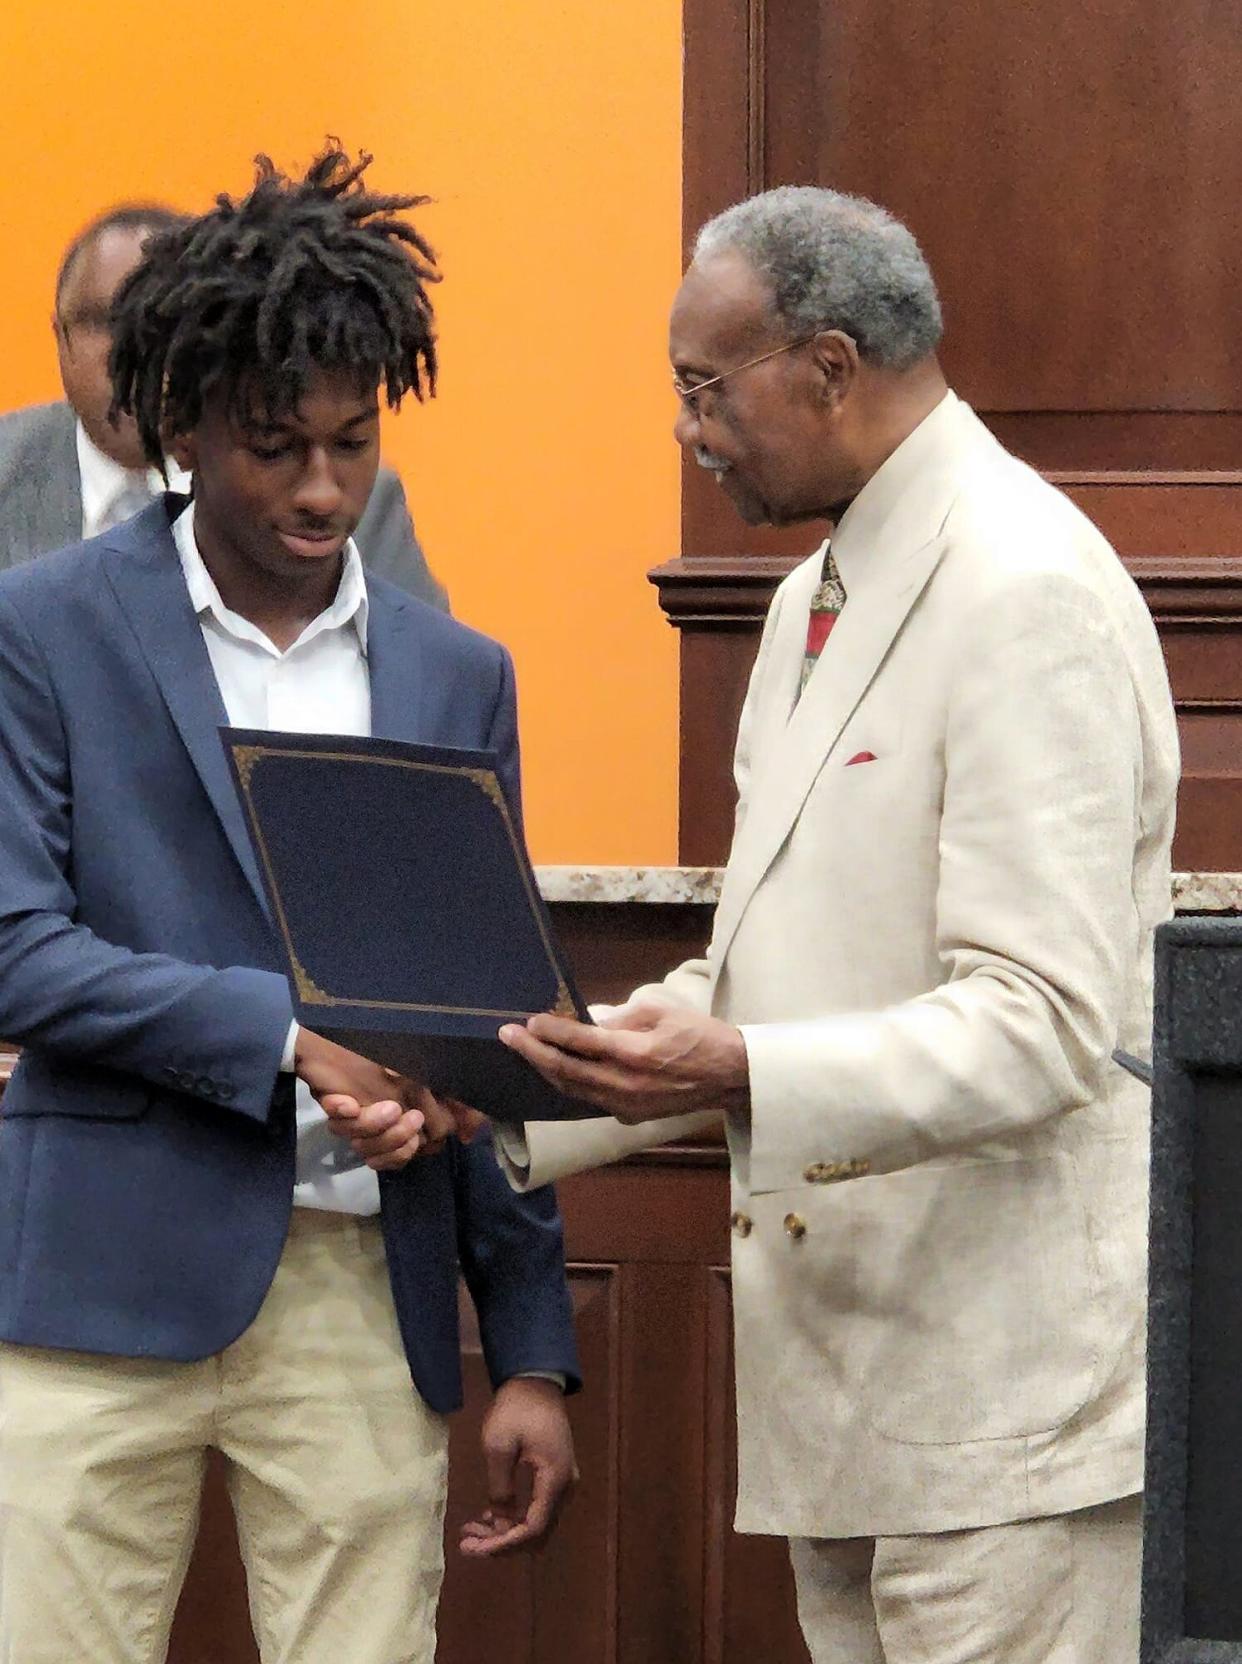 Corion Evans, Mississippi Teenager Honored For Saving 3 Girls, Police Officer After Car Plunges Into River